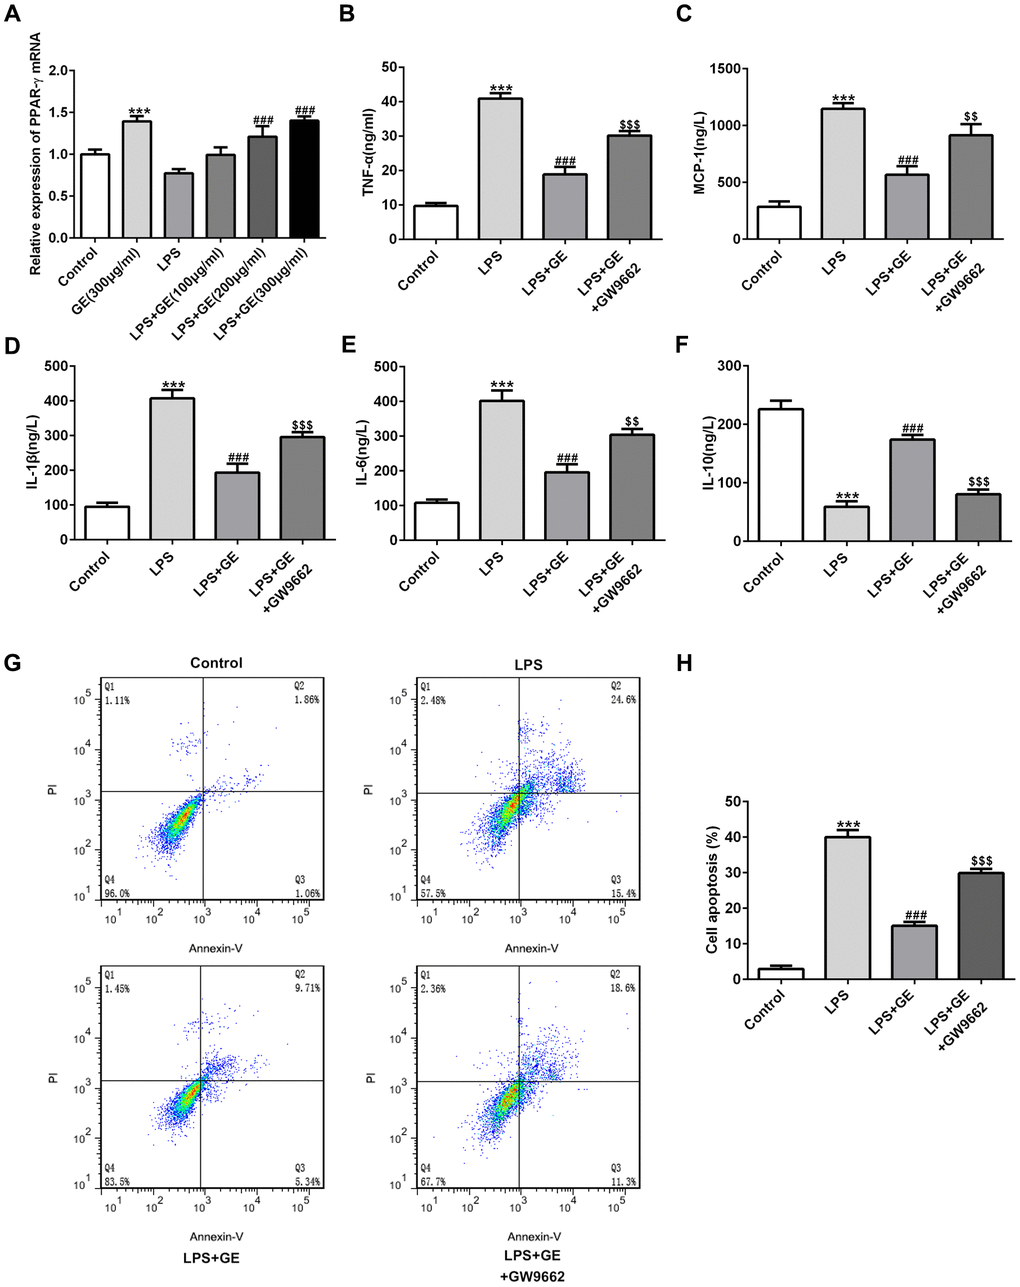 Inhibition of PPARγ abolished the effect of GE. LPS-induced HK-2 cells was utilized to simulate sepsis-induced kidney injury. Cells were treated with GE (100 μg/ml, 200 μg/ml, 300 μg/ml), and the mRNA level of PPARγ was detected by qRT-PCR (A). GW9662, a PPARγ antagonist, was employed to treat HK-2 cells, and then the concentrations of inflammatory cytokines including TNF-α, IL-6, IL-10, IL-1β, and MCP-1 in each group were measured using ELISA kit (B–F). Cell apoptotic rate in each group was determined via usage of flow cytometry analysis (G, H). **, ***p